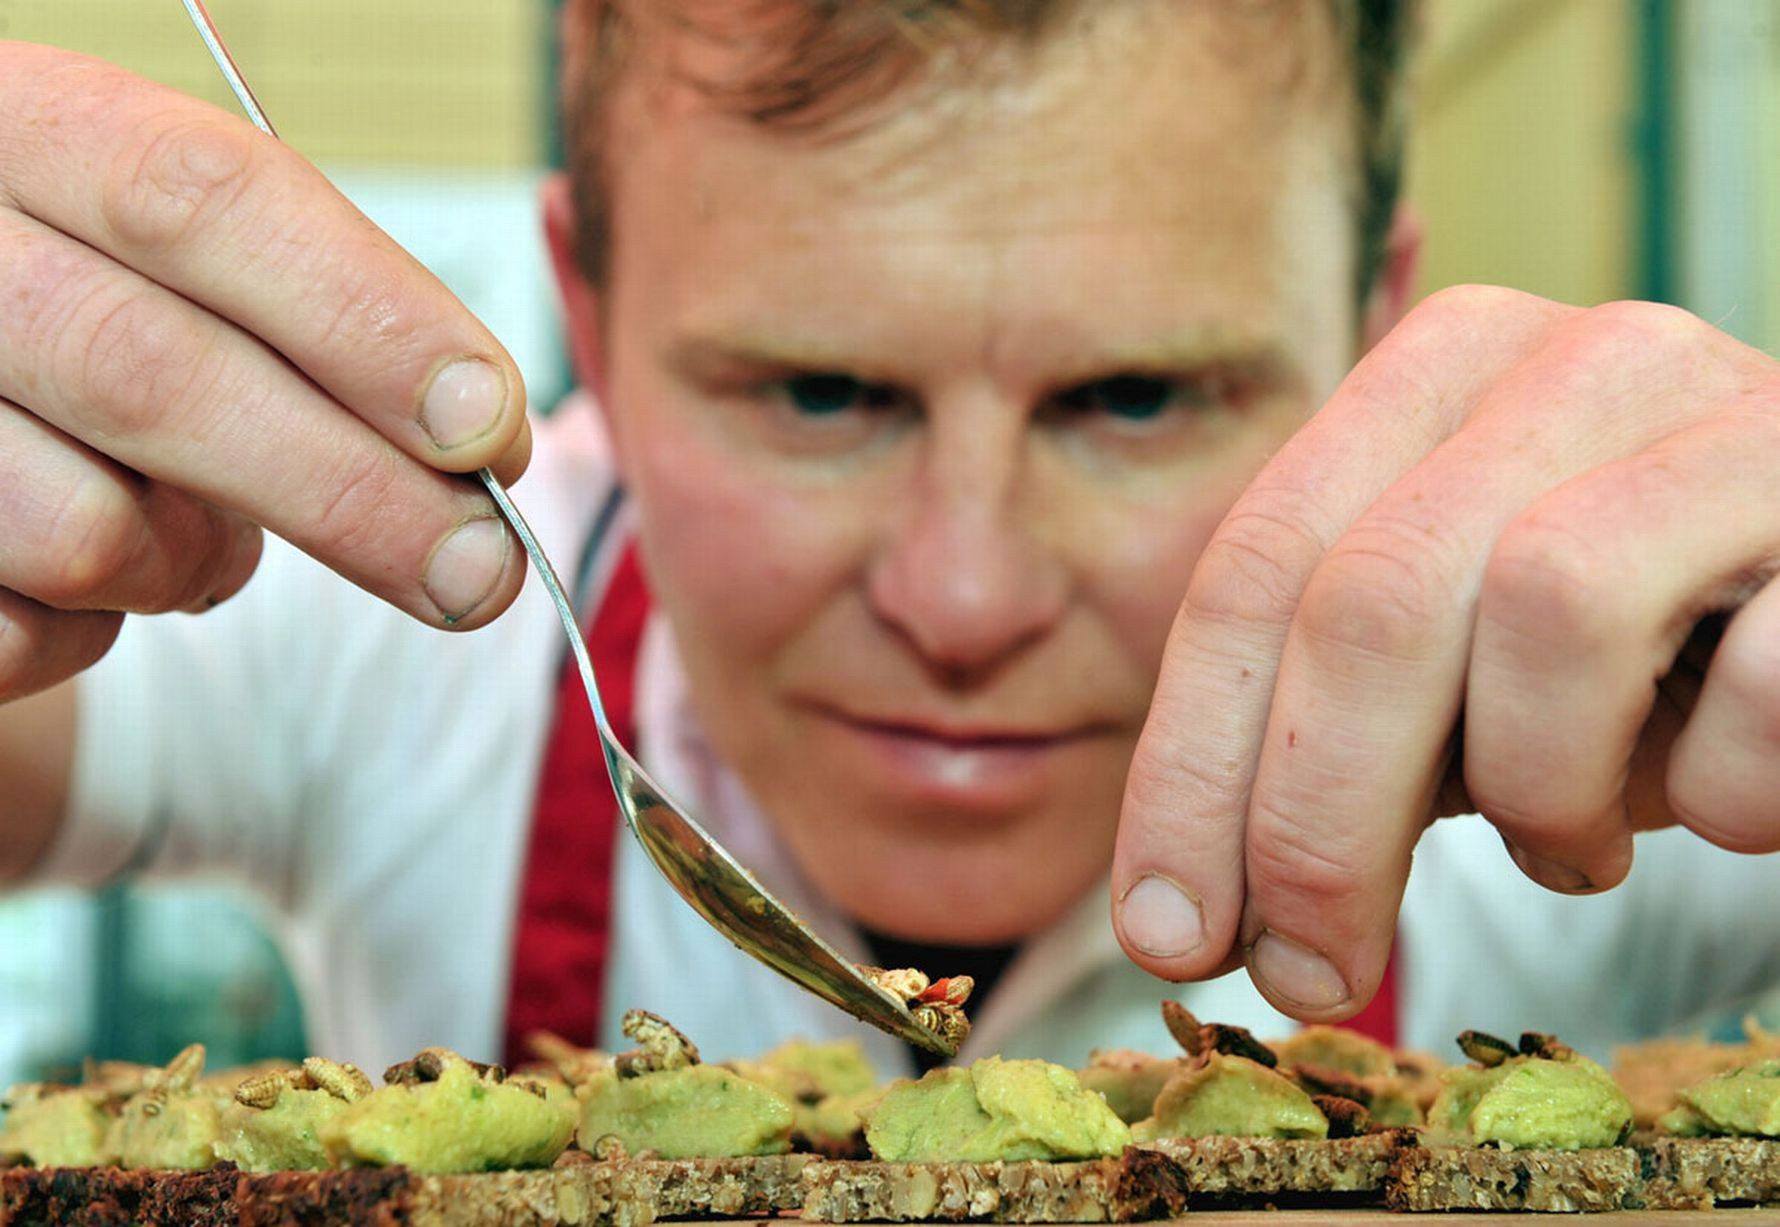 A man dressed as a chef delicately places cooked grubs as a garnish on top of some hors d'oeuvre.